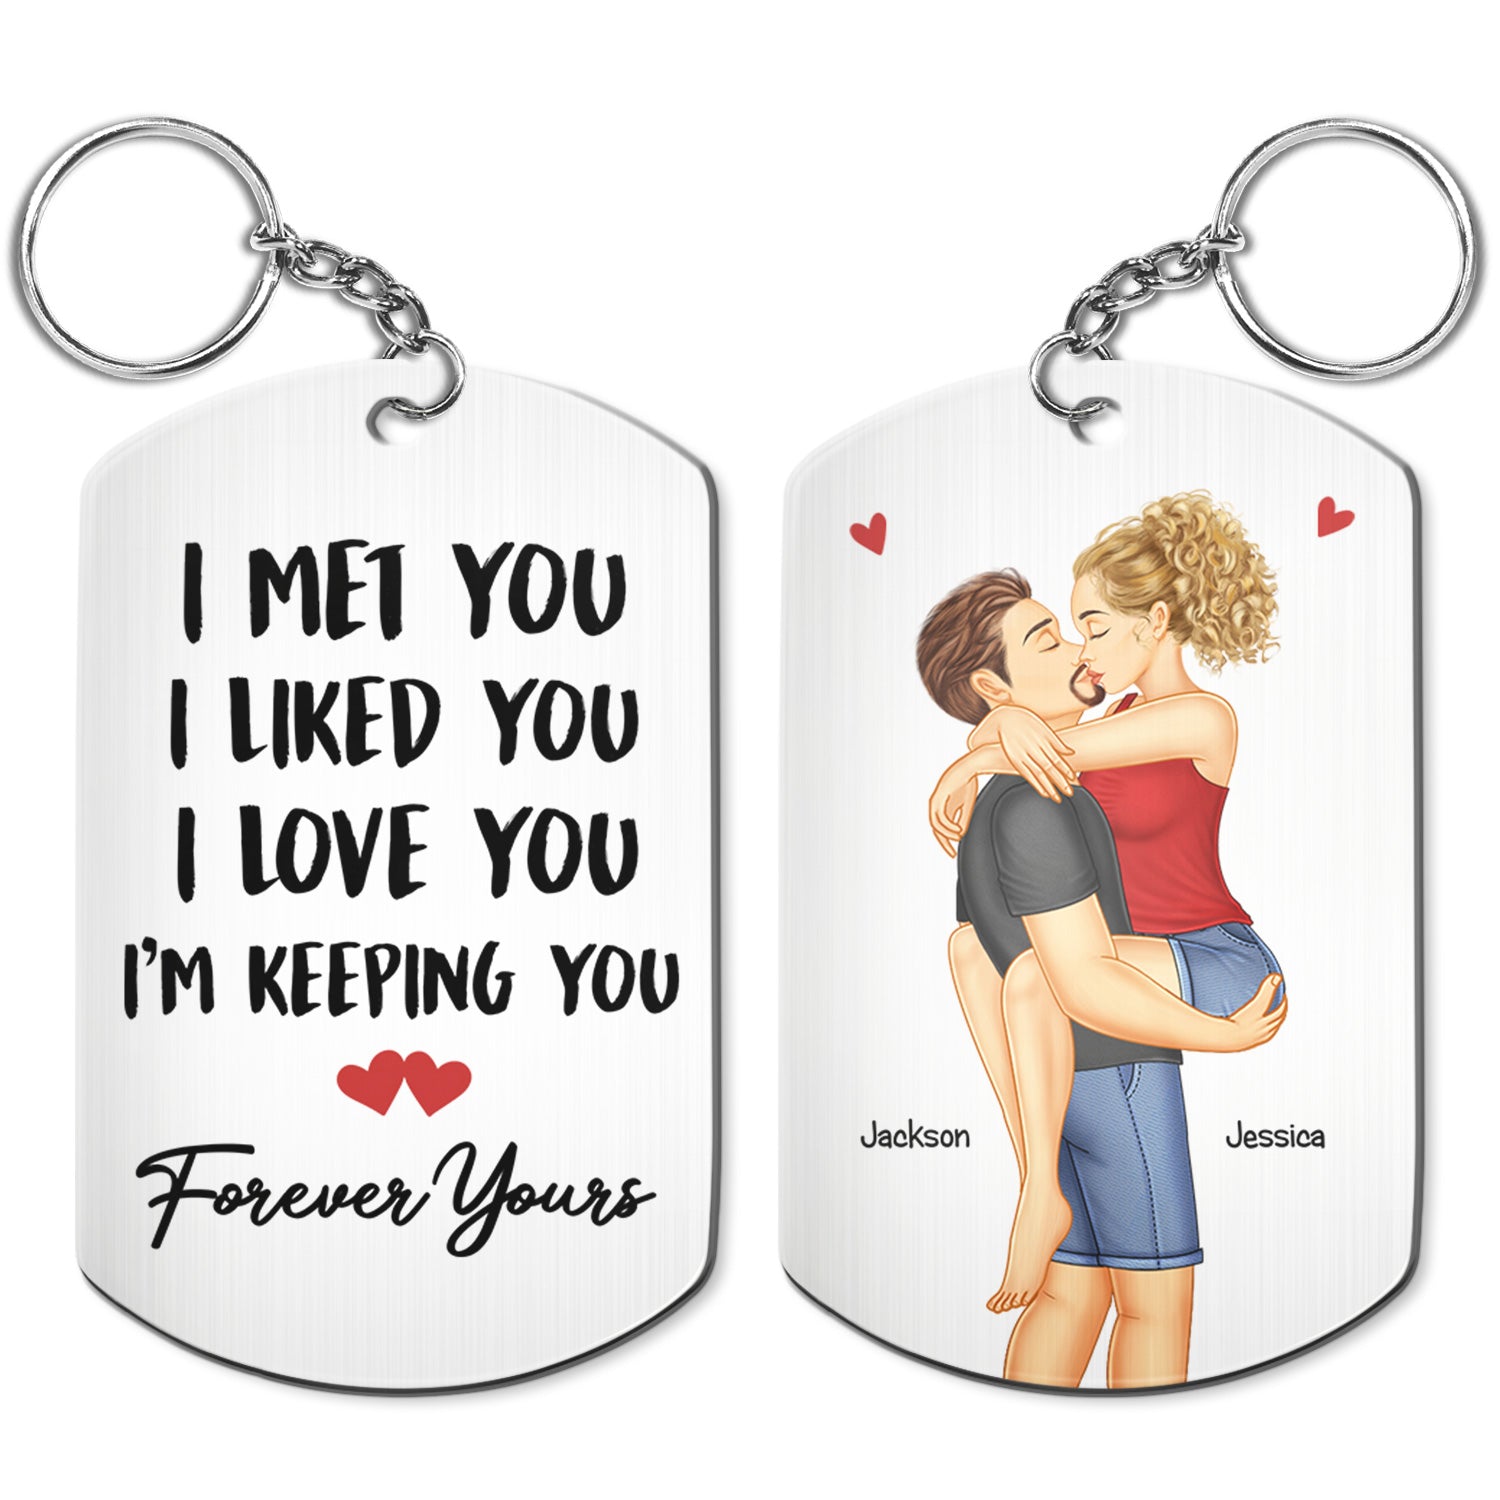 I Met You I Liked You I Love You Keeping You - Birthday, Loving, Anniversary Gift For Spouse, Hubby, Wifey, Boyfriend, Girlfriend, Couple - Personalized Aluminum Keychain